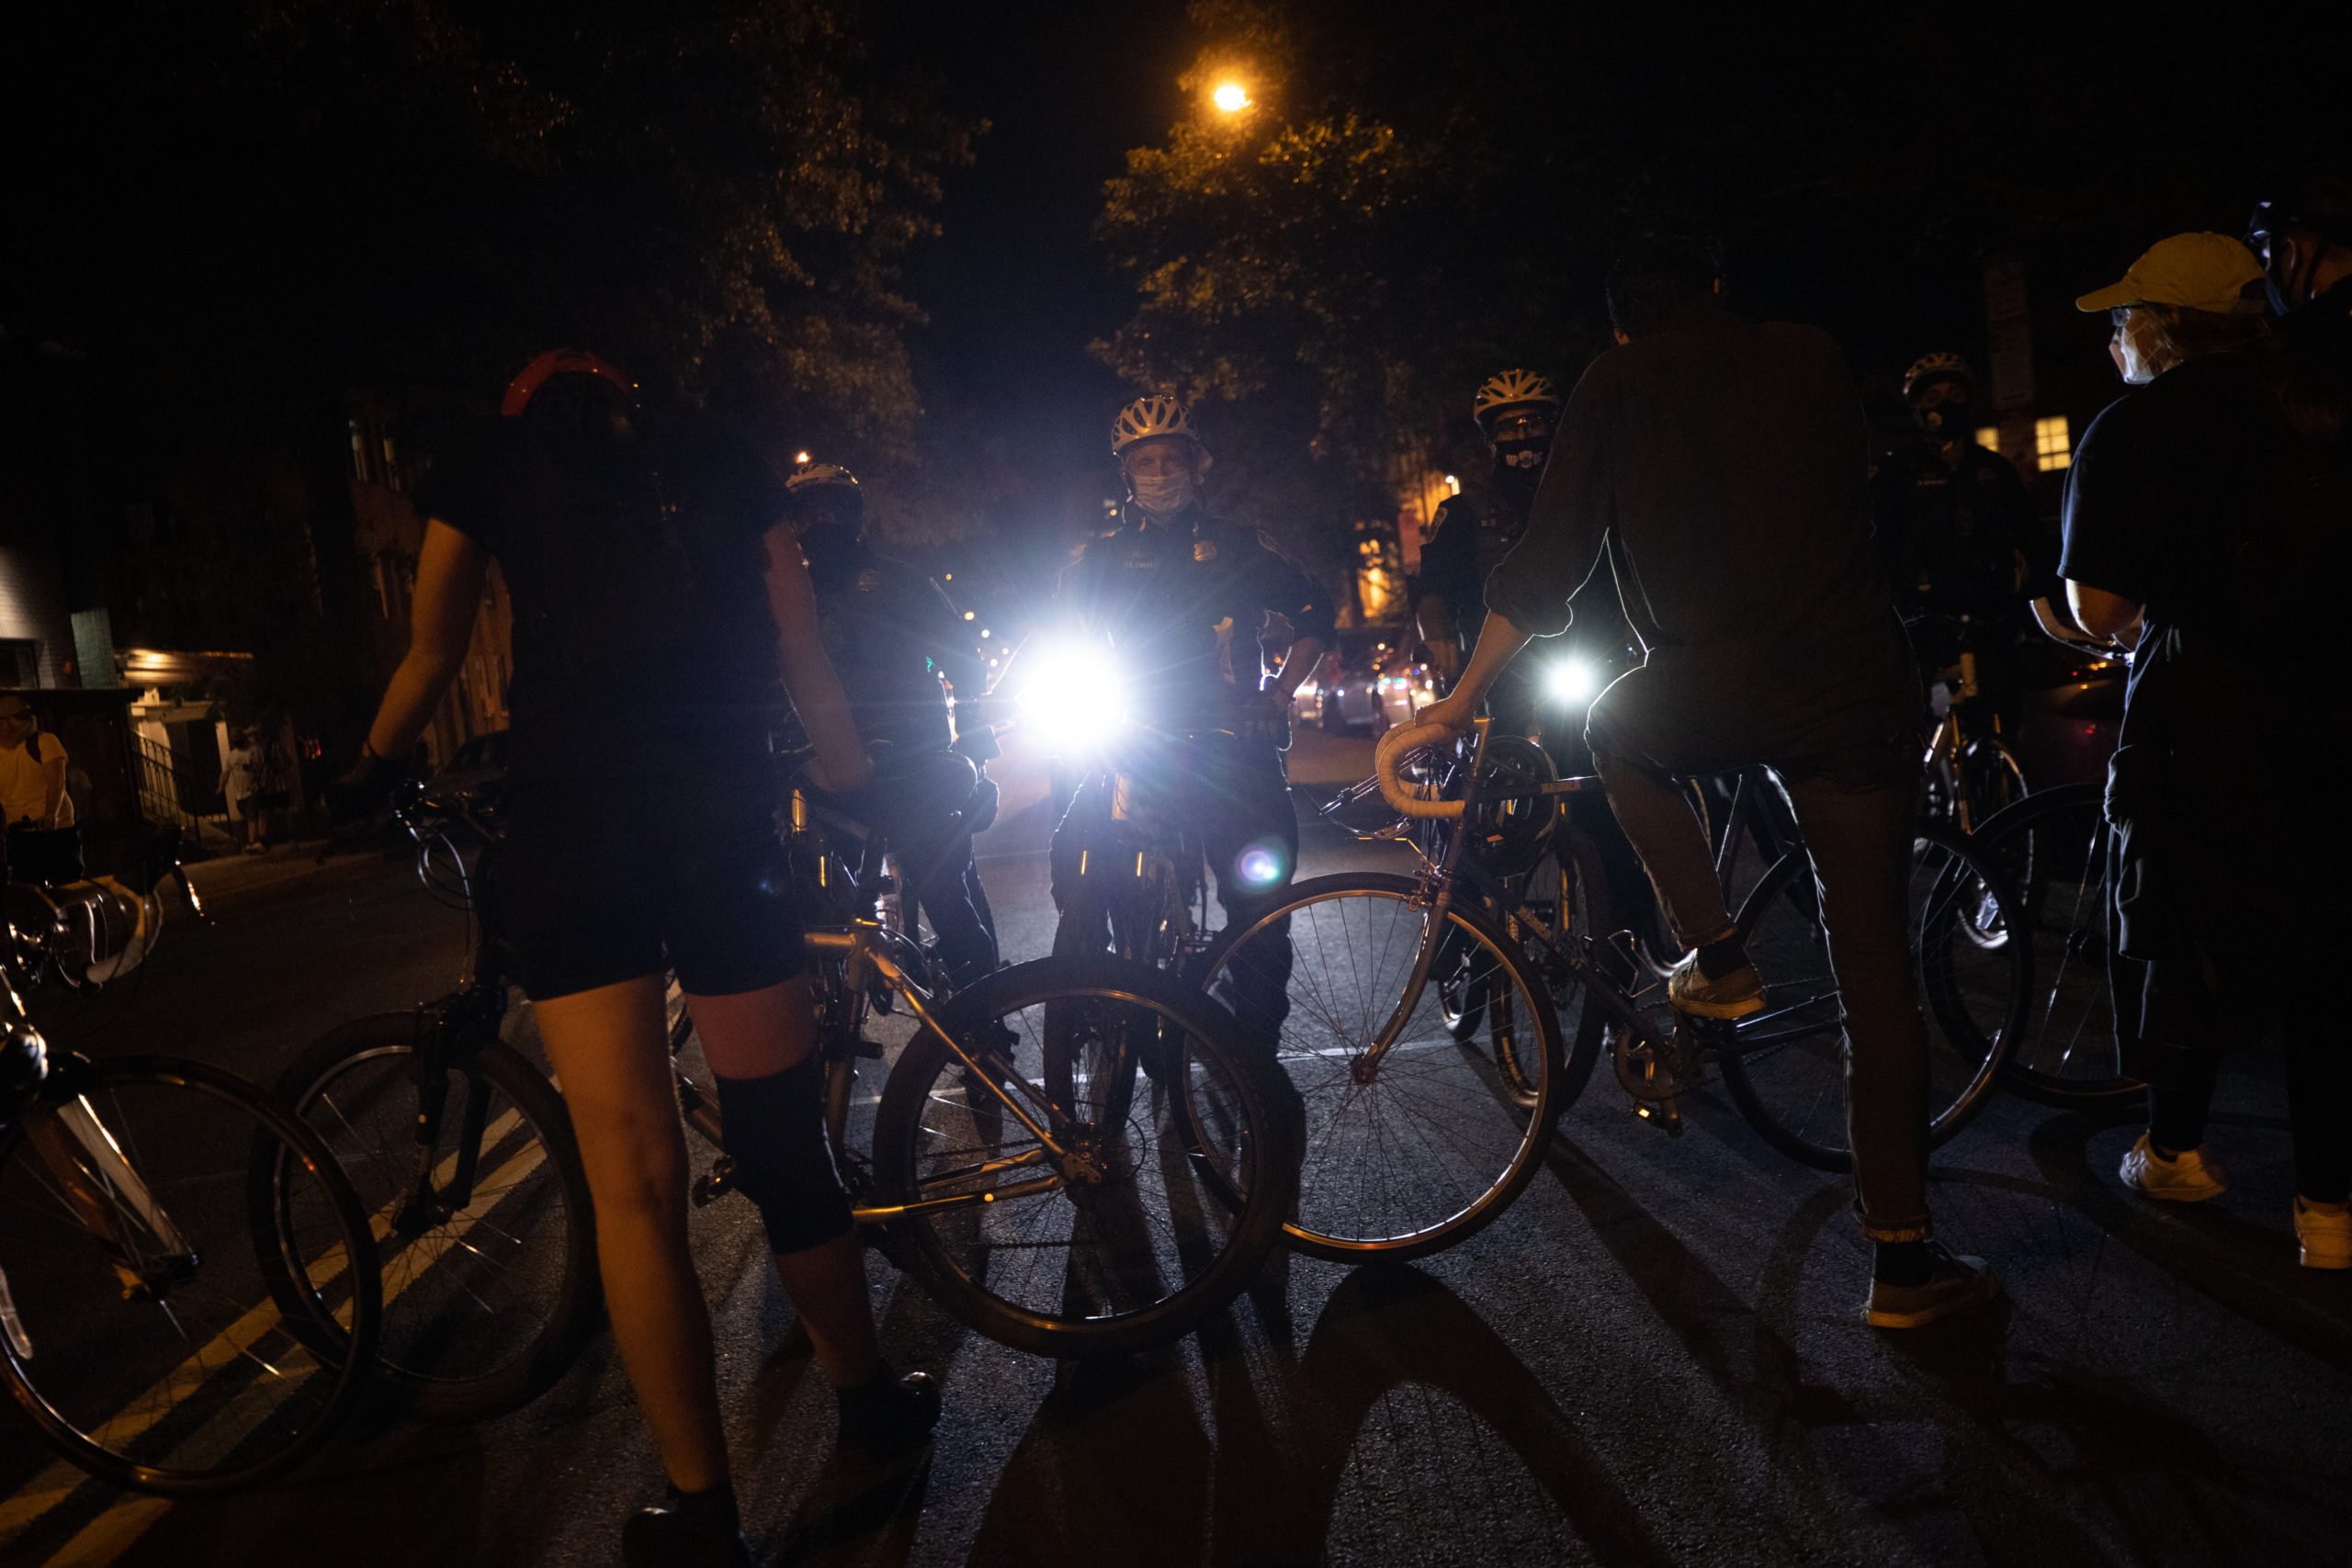 Protesters form their own bike line to block Metropolitan Police Department access to individuals on foot in Washington, D.C. on Sept. 23. (Photo: Kaylee Greenlee / DCNF) 